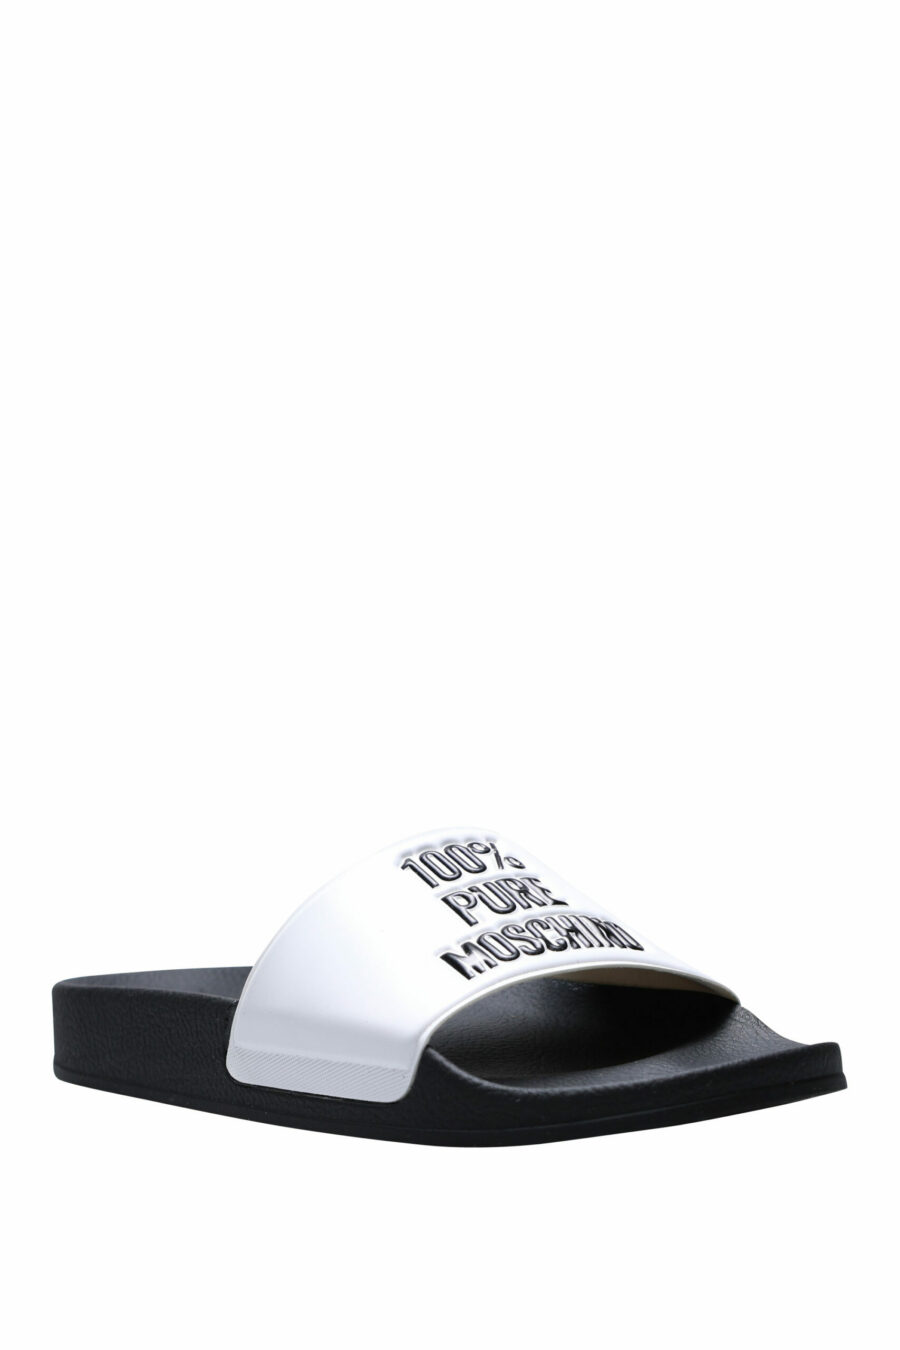 White flip flops with logo "100% pure moschino" - 8054388534581 1 scaled